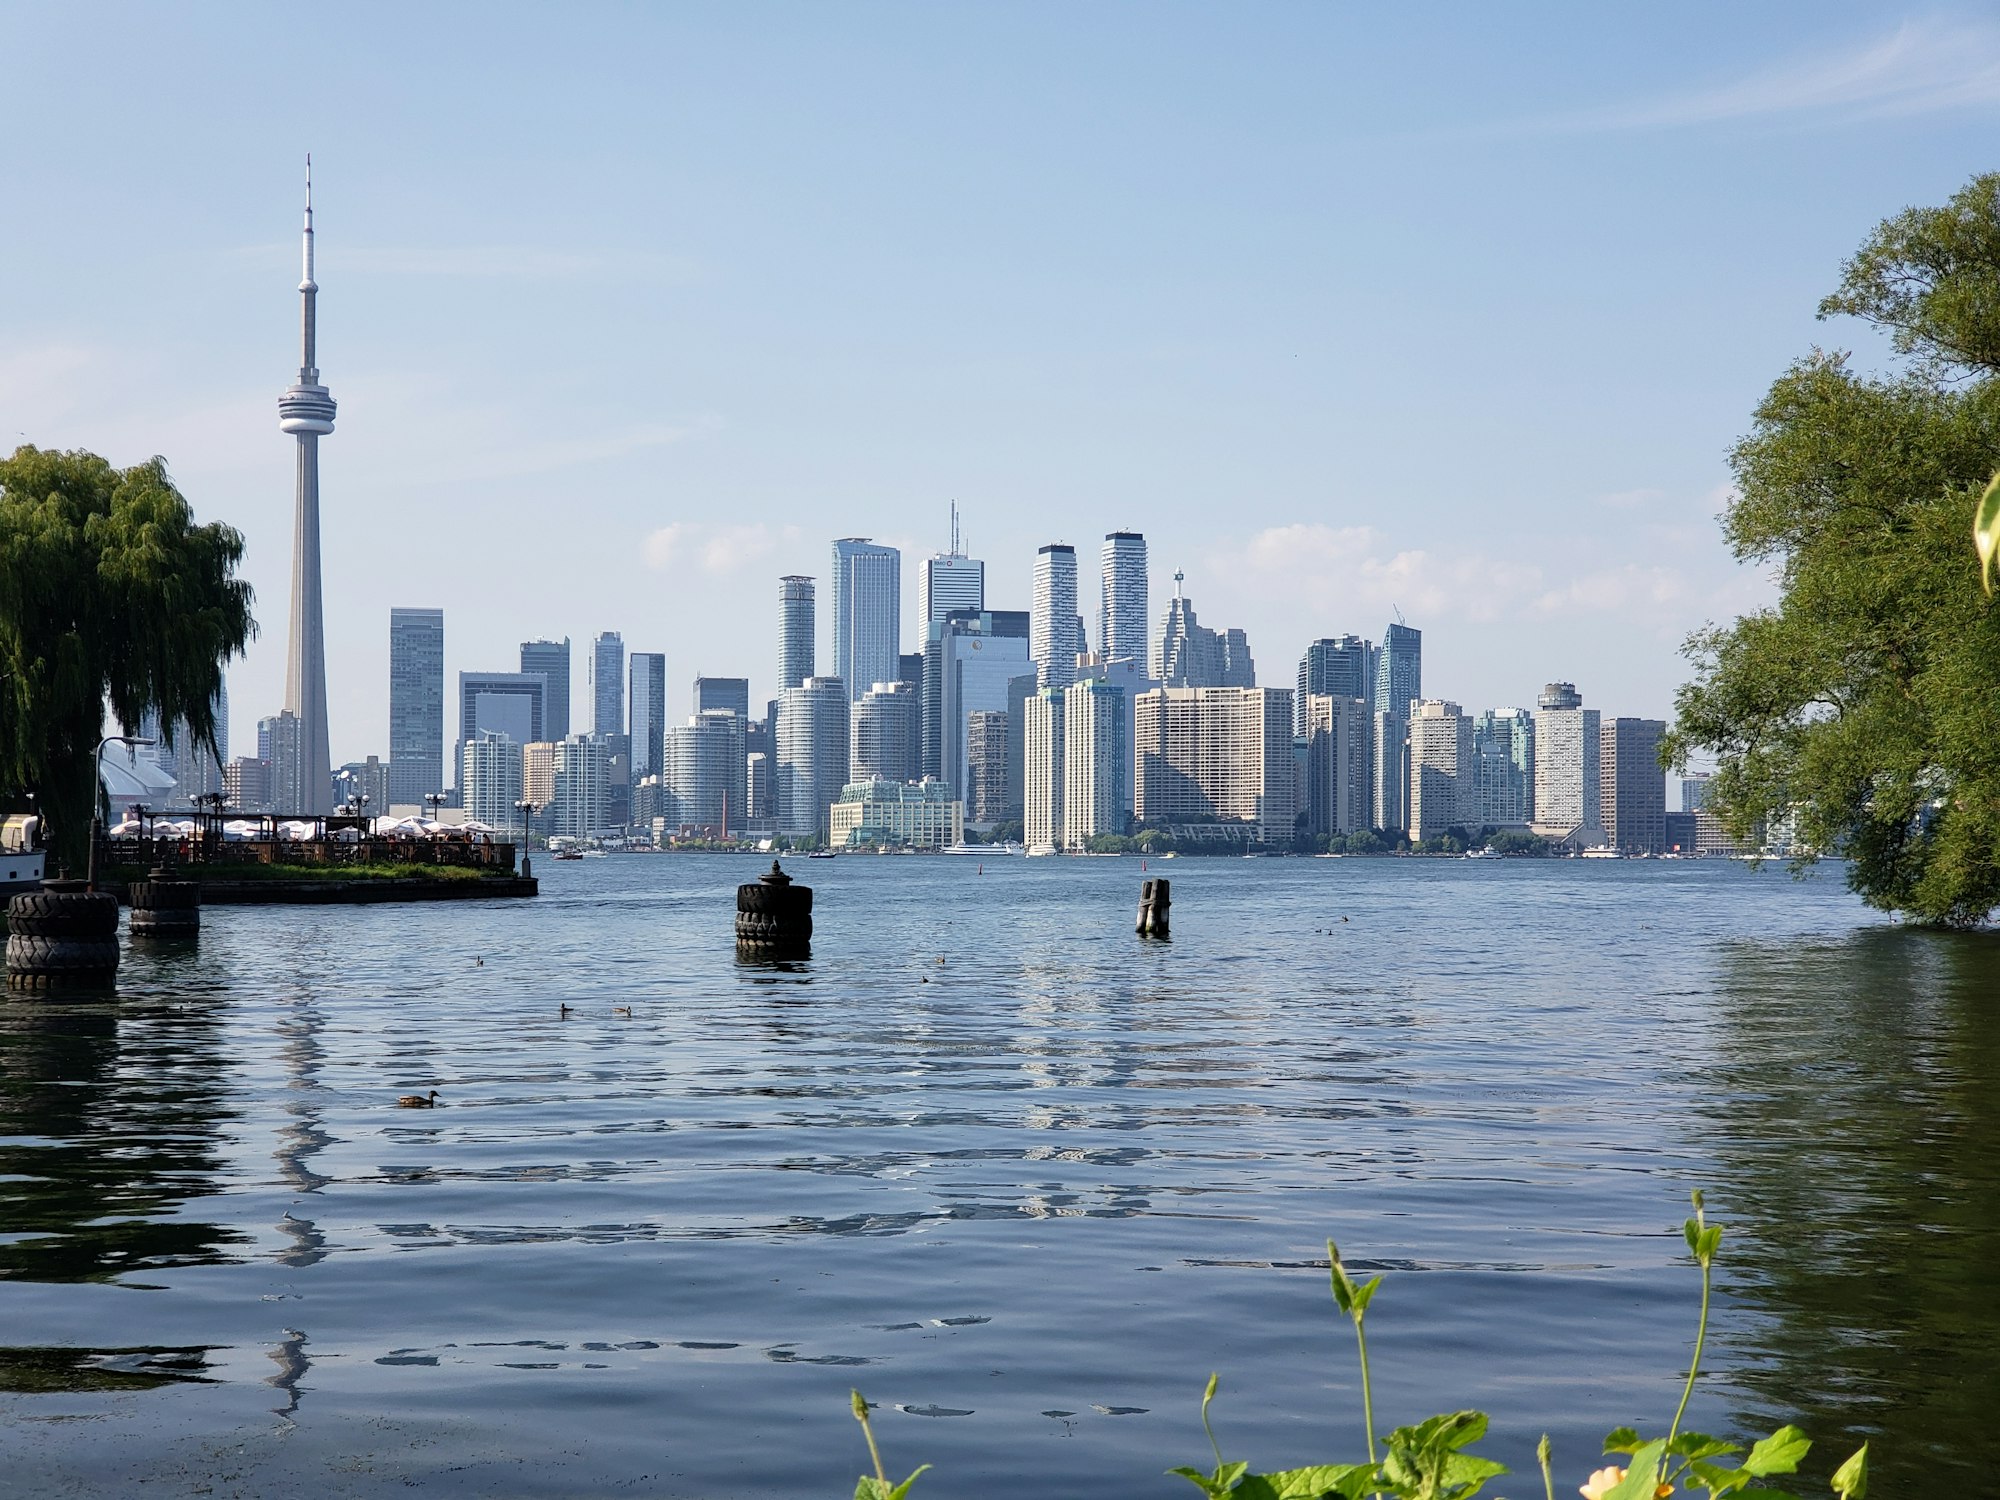 This is a beautiful landscape picture from one of Toronto’s islands. This is a scene of the downtown core and Toronto’s beautiful skyline. I shot this while I was heading back to Toronto with my friends, we were chilling at the Toronto islands and were heading back. While we were heading back to the ferry I saw this view and I Immediately took out my Galaxy and tried to get the best exposure and depth of field possible. I turned out really good and I was happy with the shot